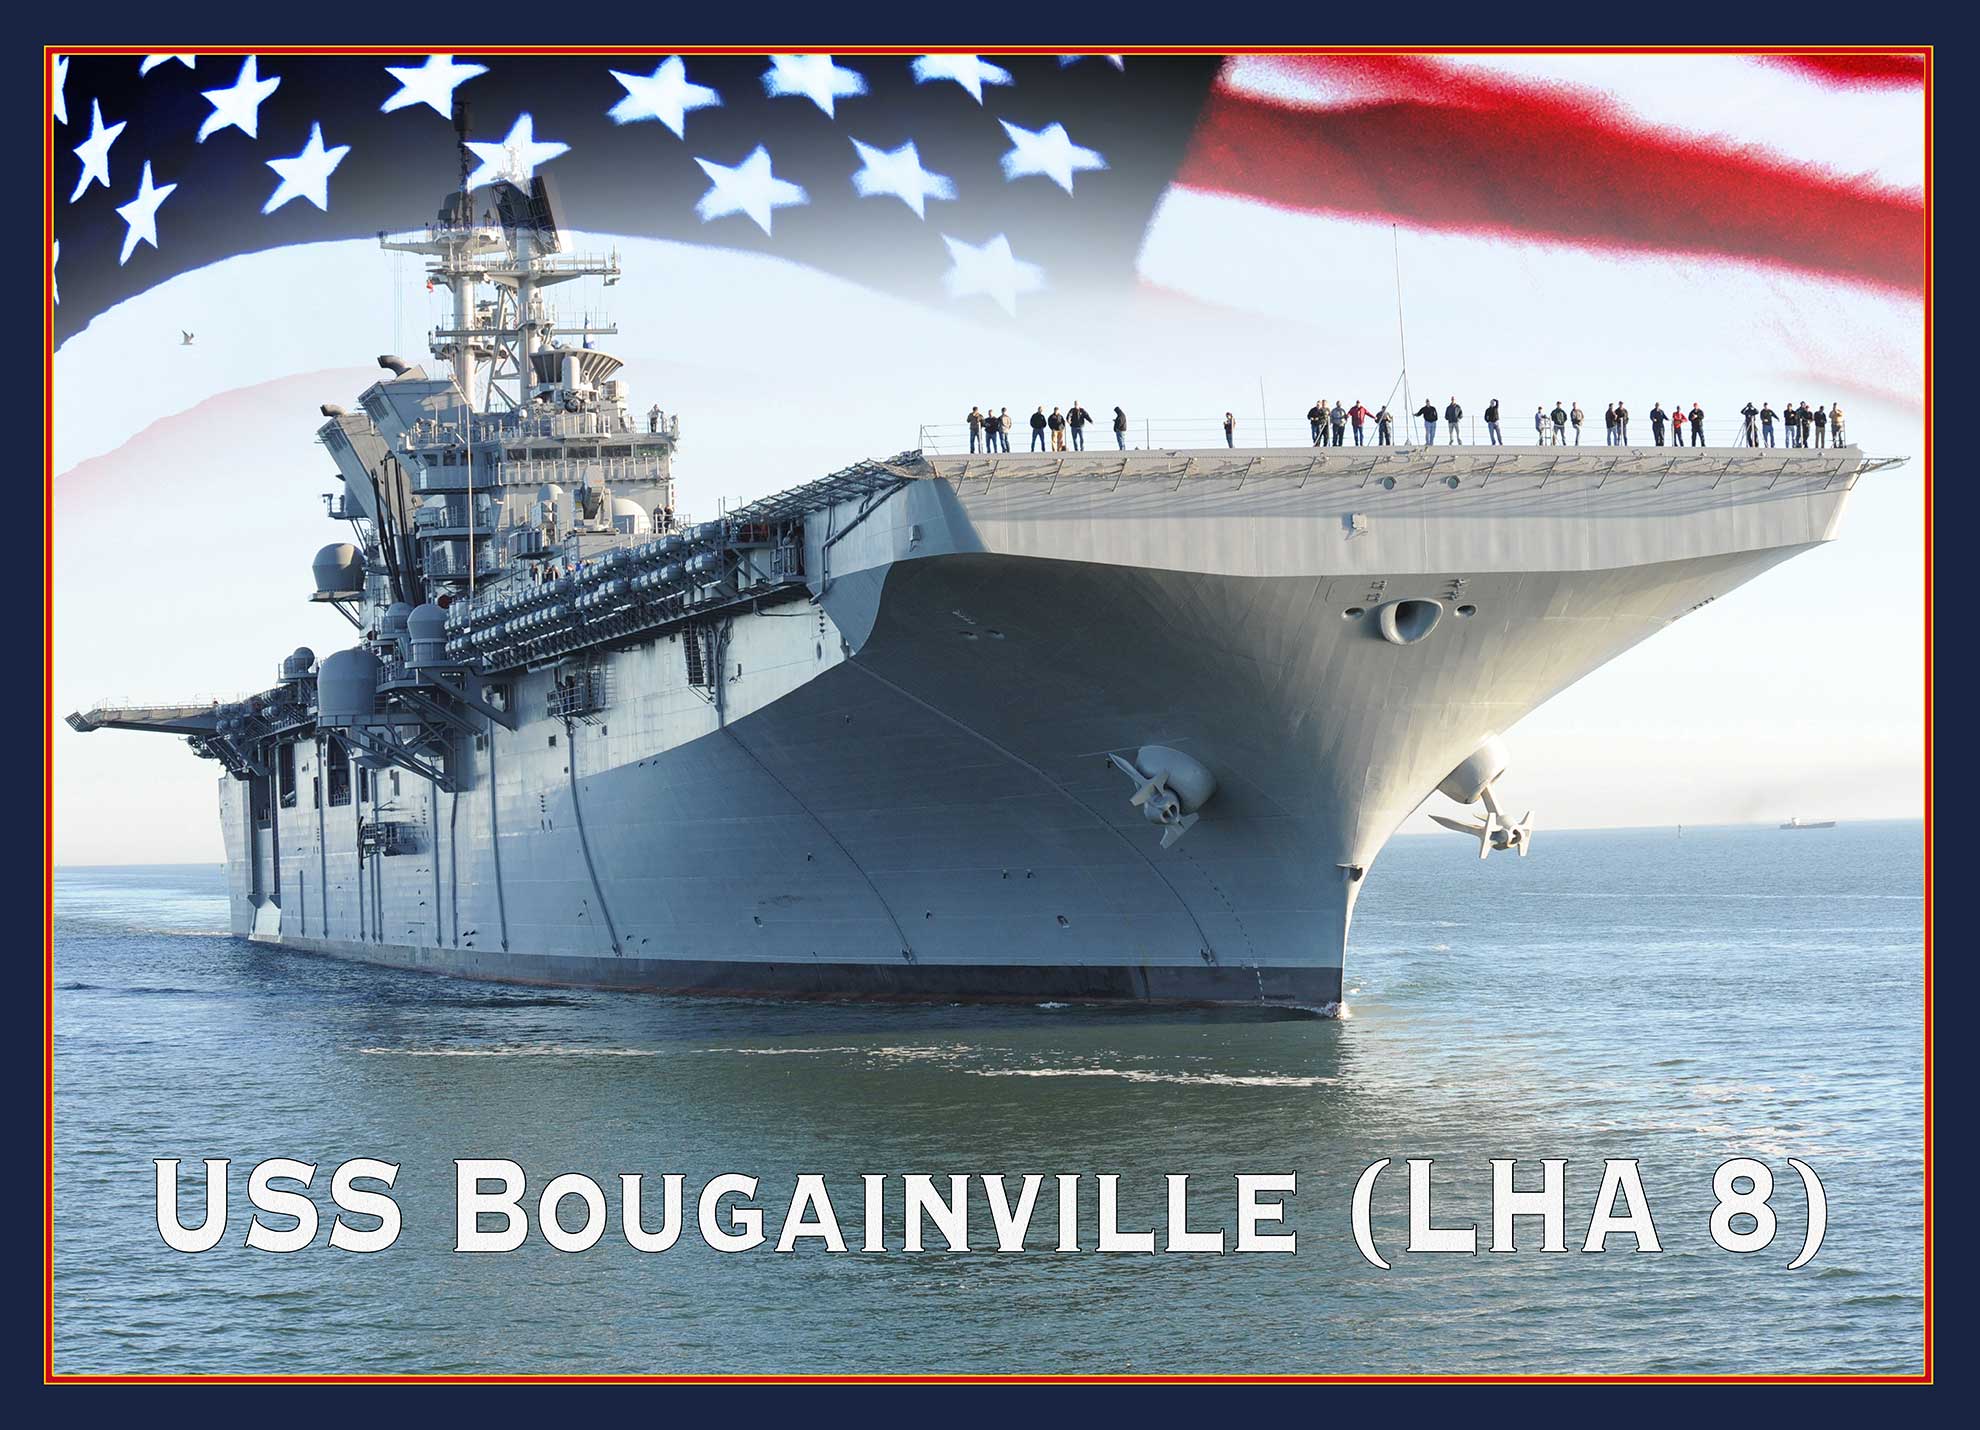 Washington D.C. (Nov. 8, 2016) A graphic representation of the future USS Bougainville (LHA 8) -- U.S. Navy photo illustration by Petty Officer 1st Class Armando Gonzales. -